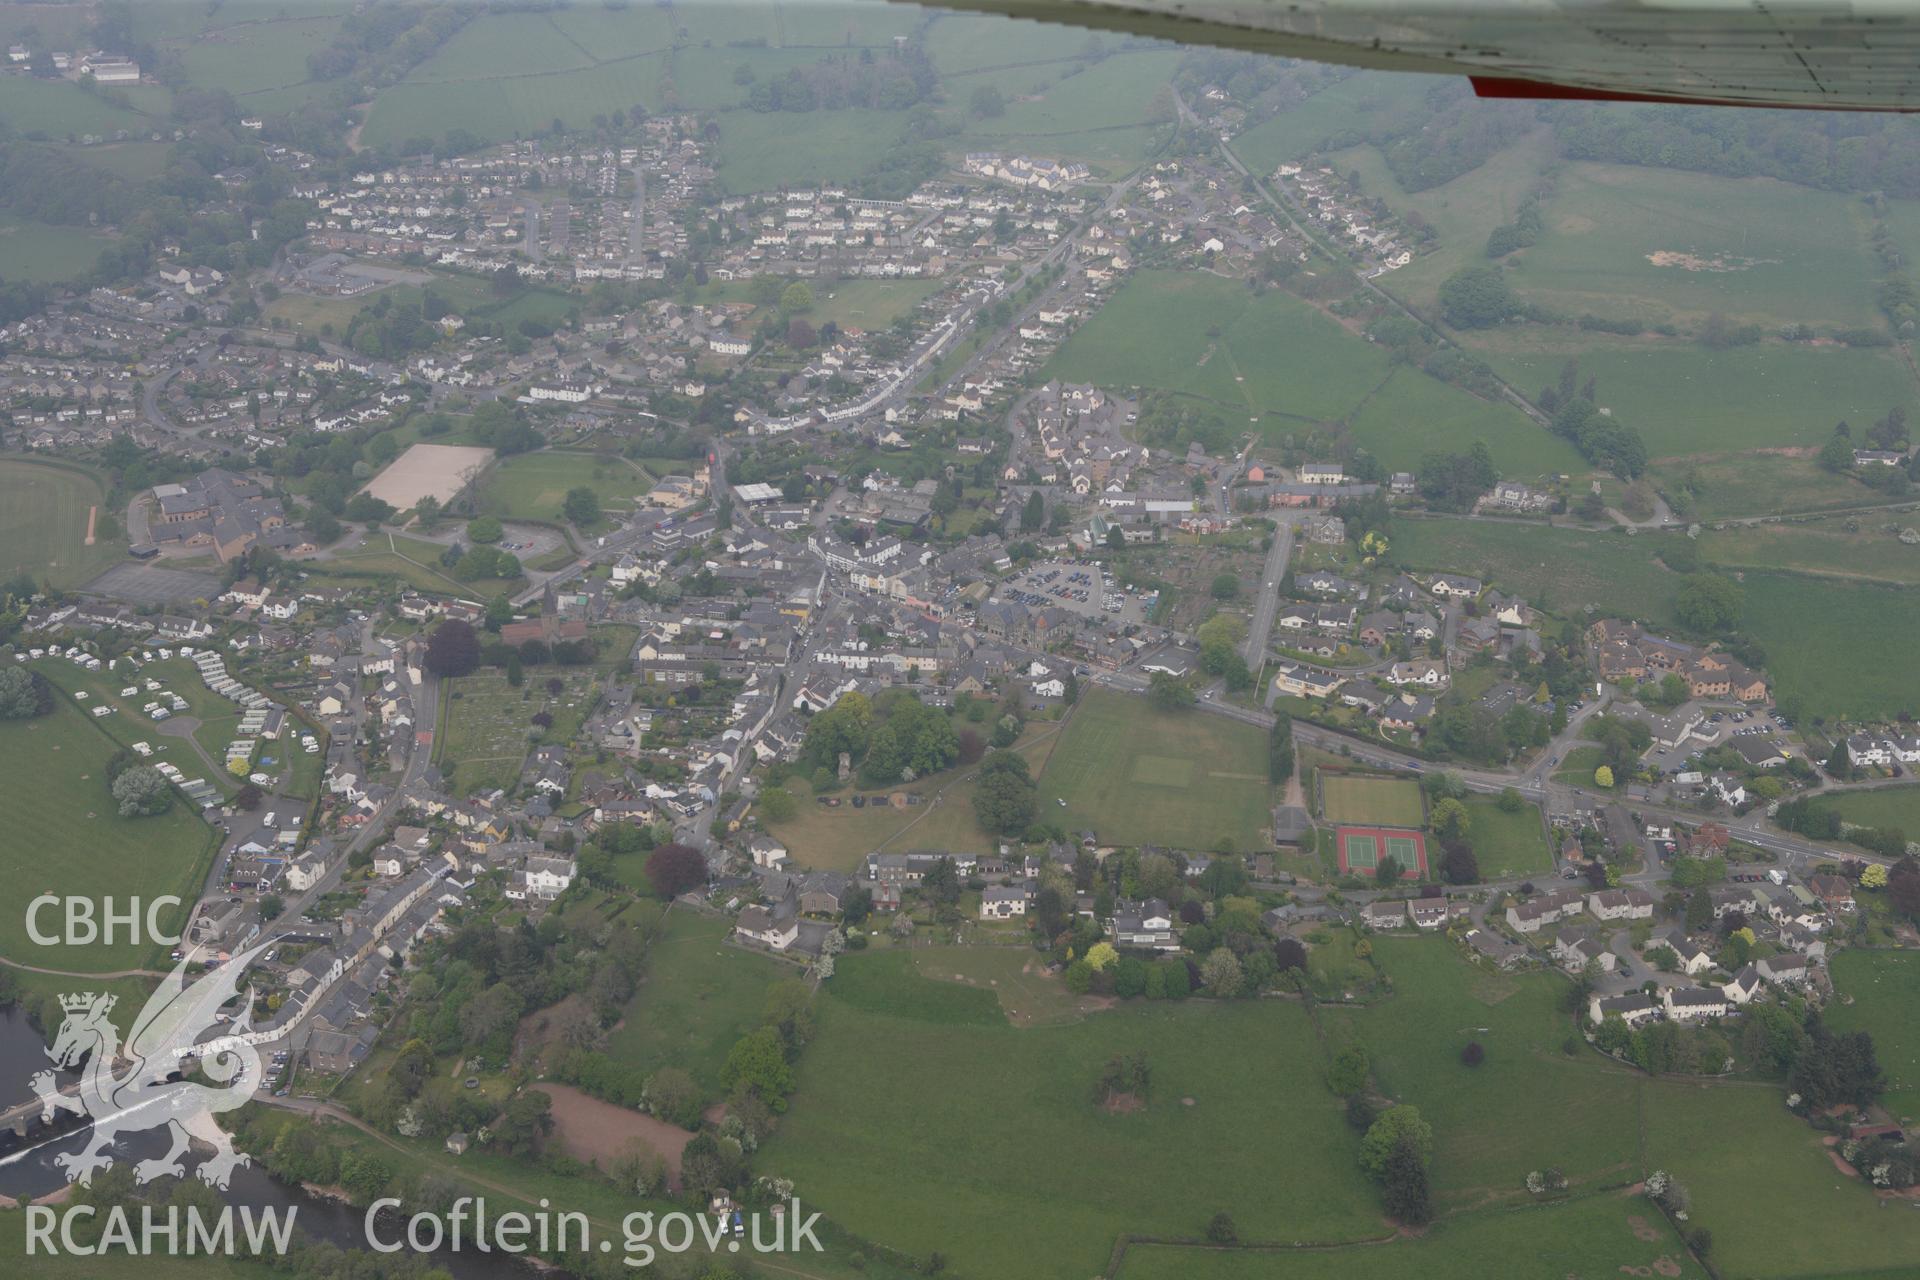 RCAHMW colour oblique photograph of Crickhowell Castle and town. Taken by Toby Driver on 26/04/2011.